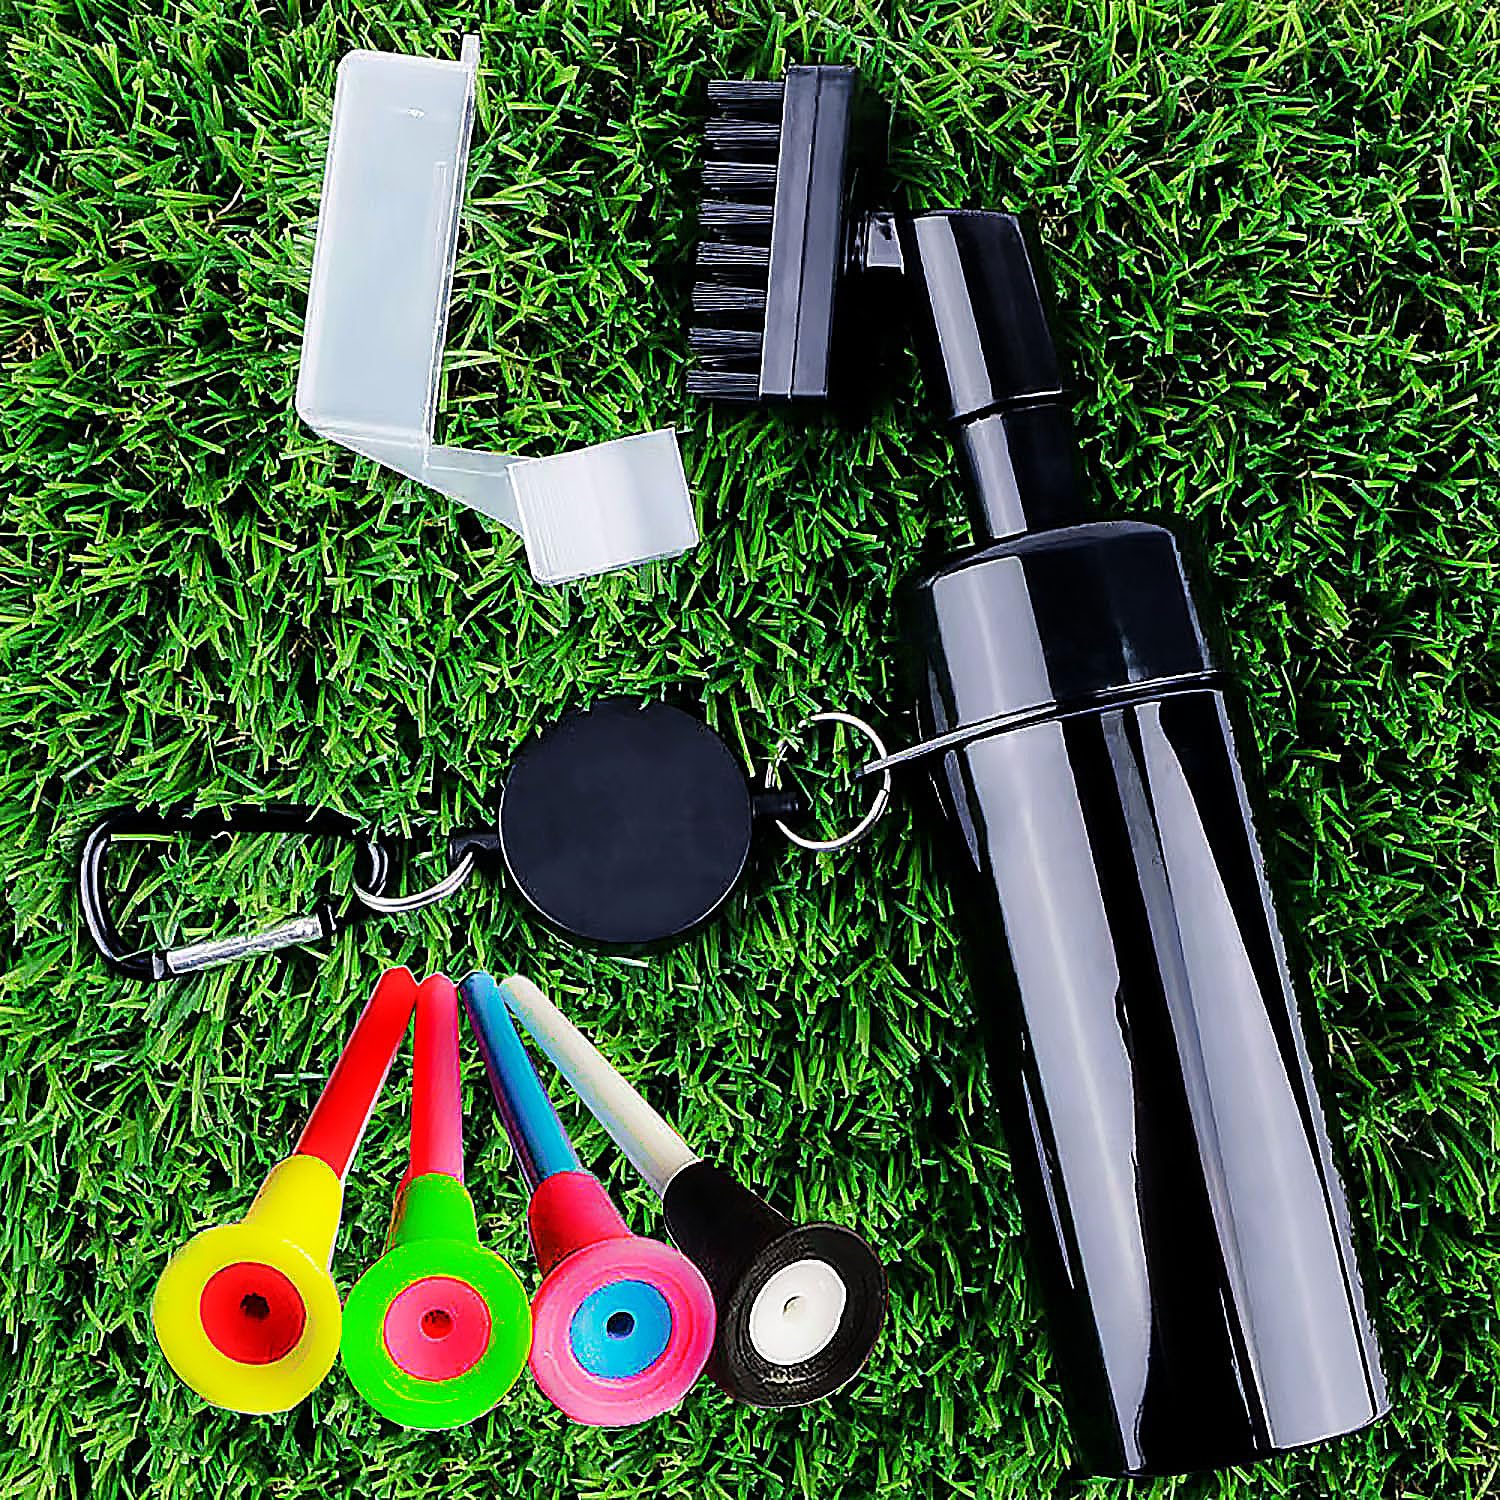 Golf Club Cleaner Brush Set, Spray Golf Water Brush, Retractable Golf Club Cleaner Brush with 2.5ft Retractable Zip-Line & Golf Ball Tees & Squeeze Water Bottle 7.5'' Holds 5oz of Water, Gift for Men